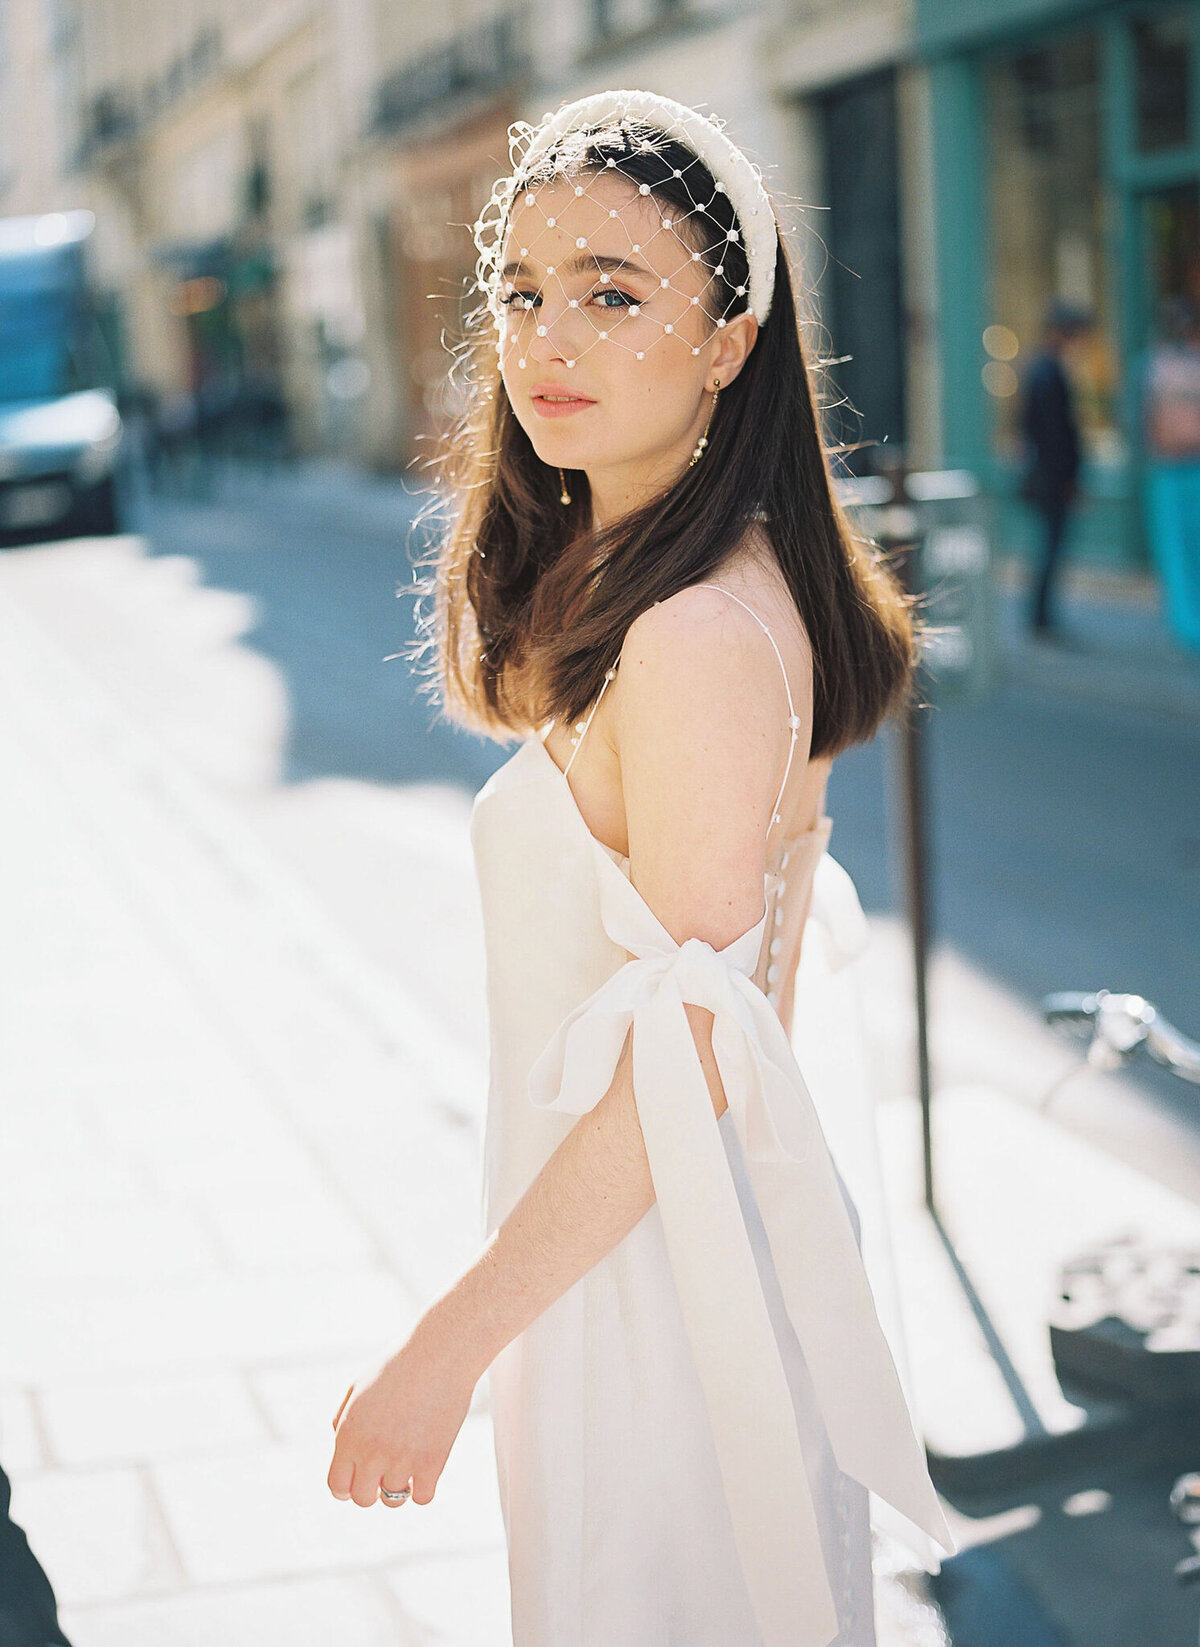 White vintage-inspired headband with fishnet hair piece by Blair Nadeau Bridal Adornments, romantic and modern wedding jewelry based in Brampton.  Featured on the Brontë Bride Vendor Guide.